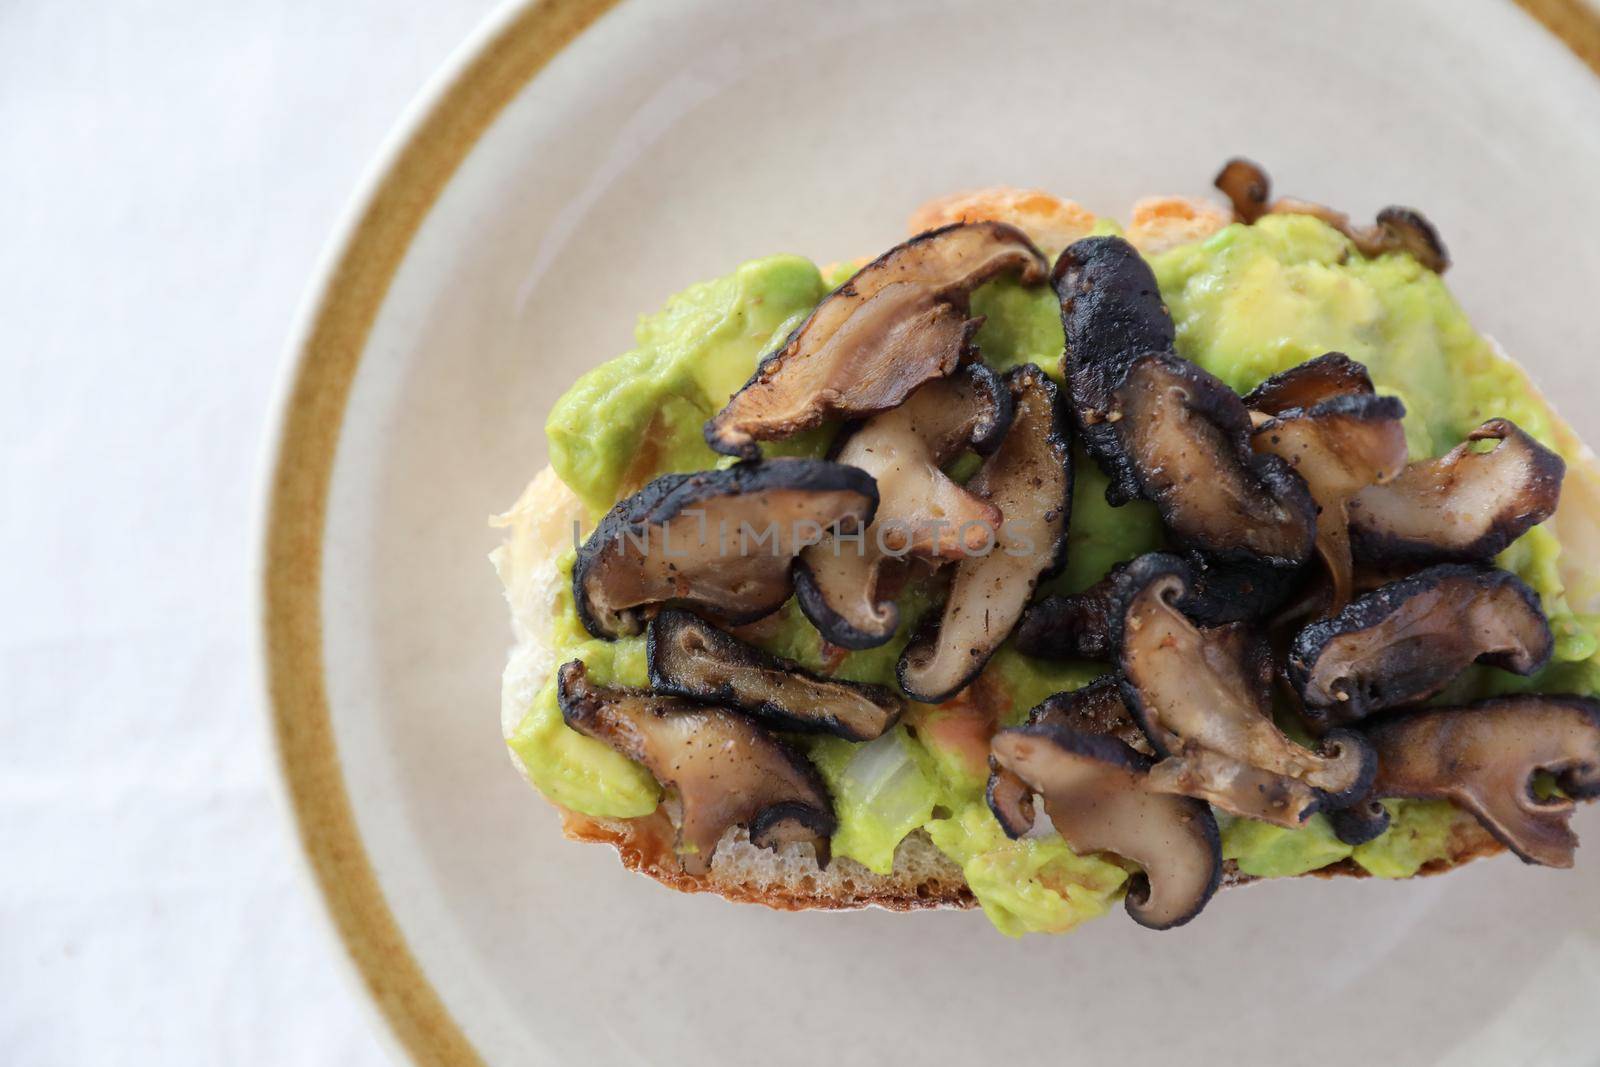 Toast with avocado and grilled mushroom in white background by piyato